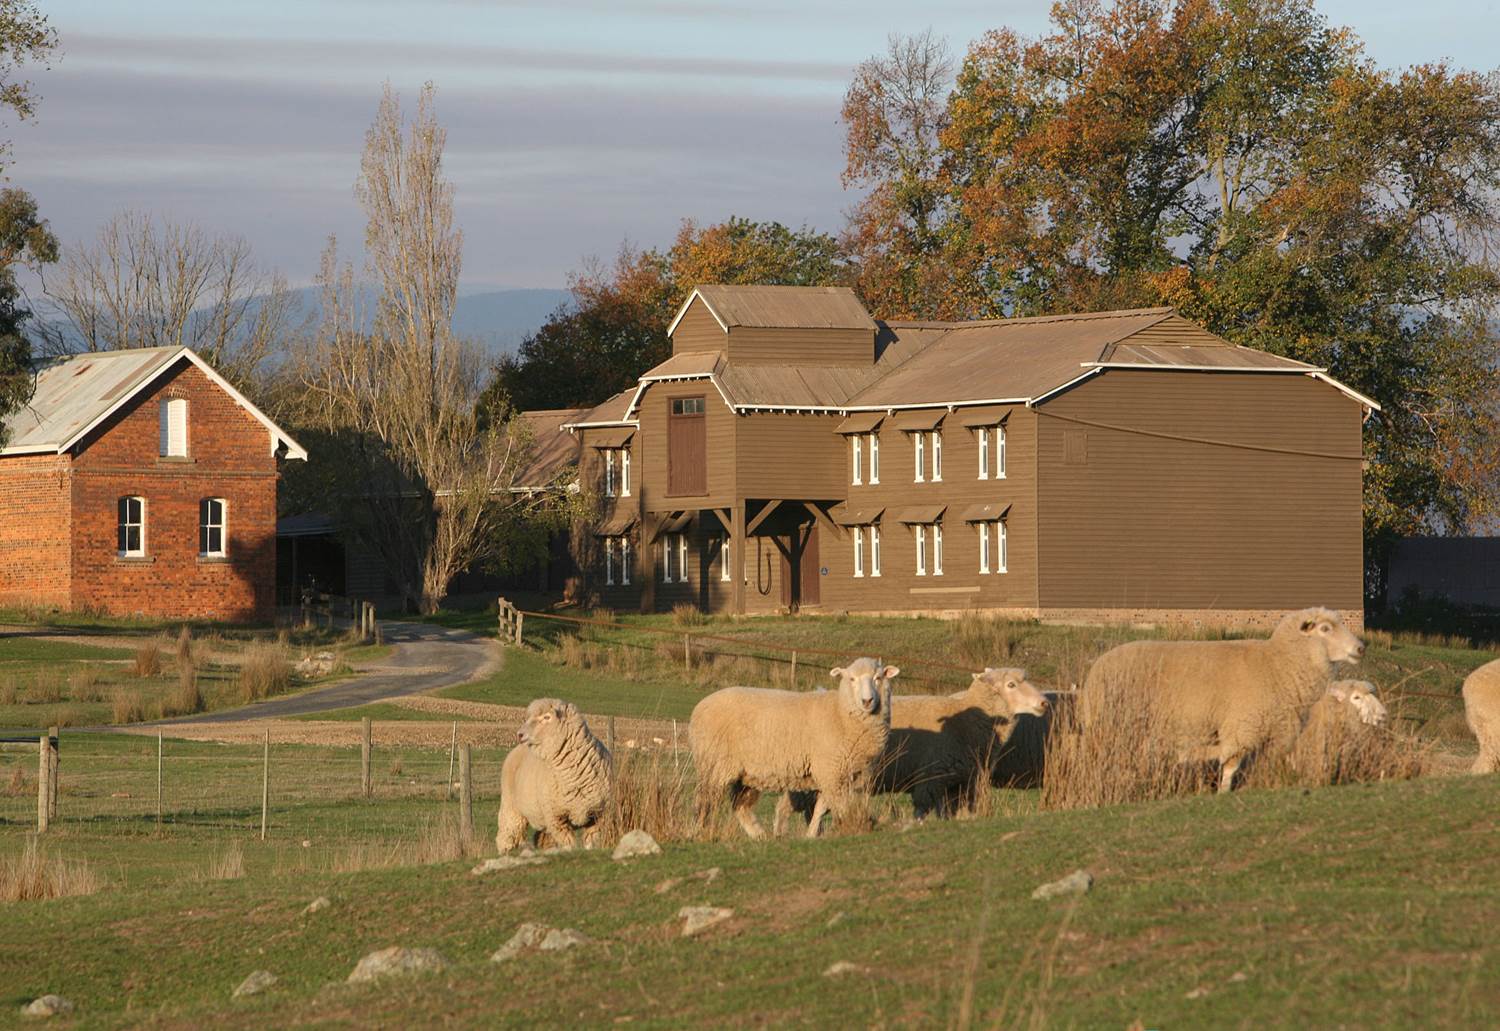 sheep in front of a farmhouse